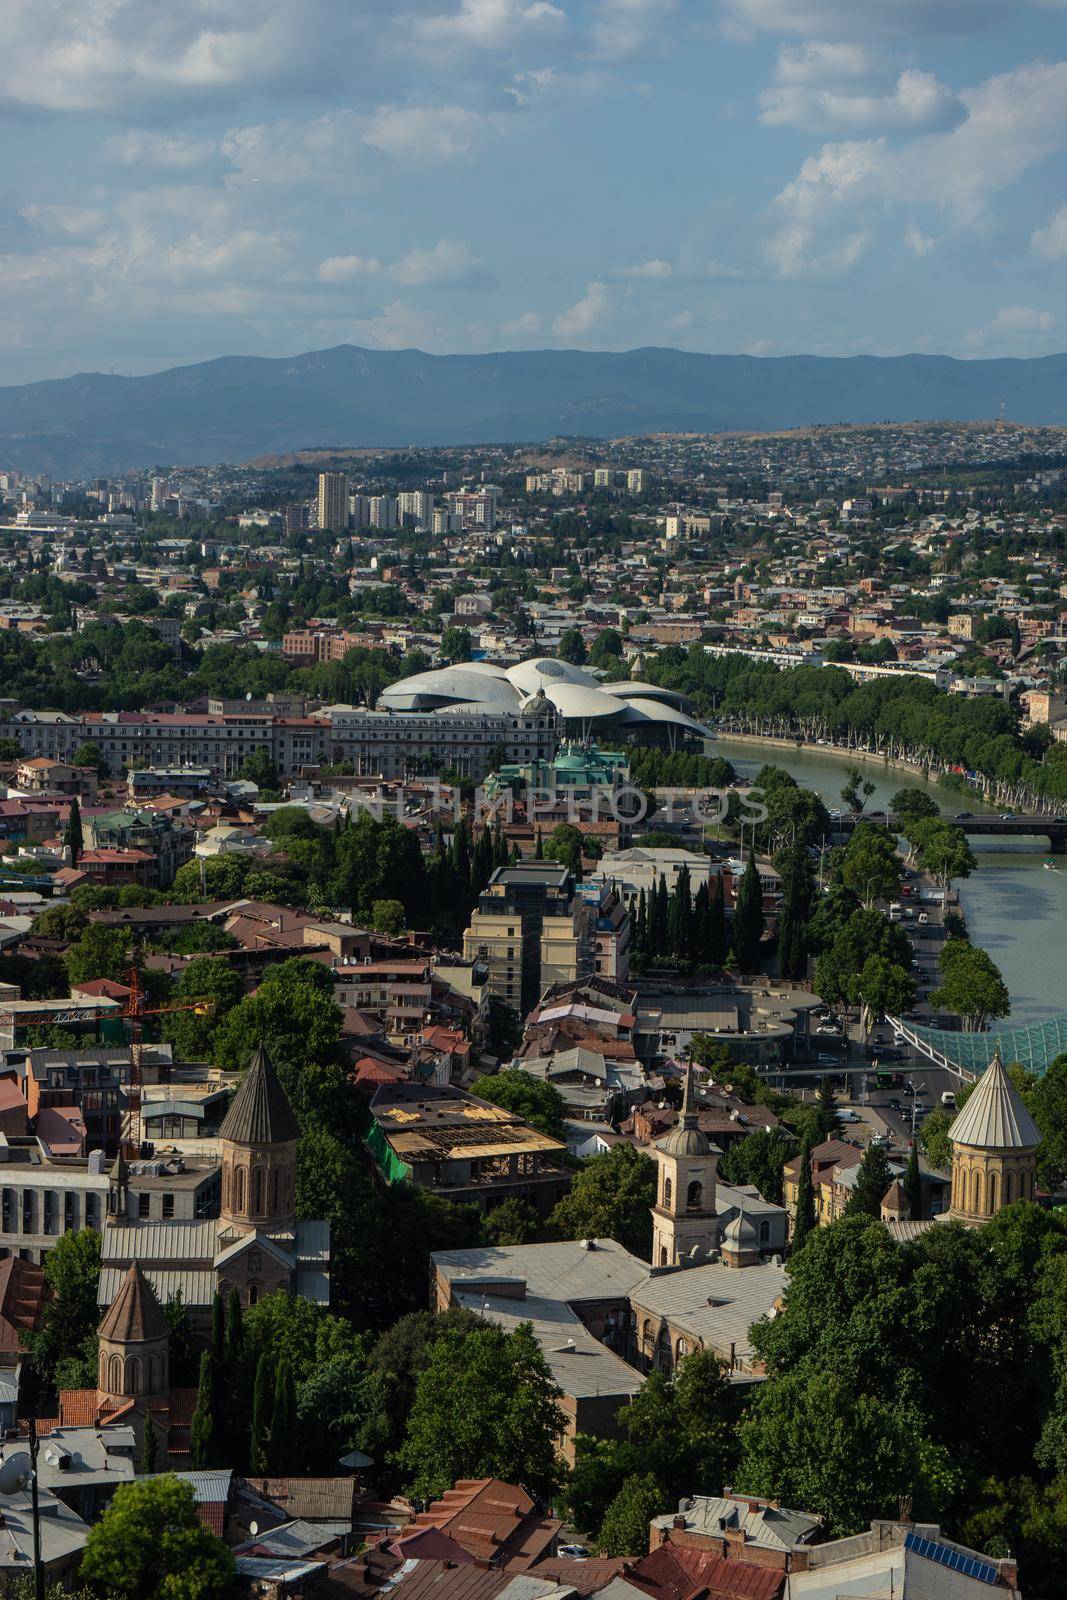 Tbilisi's cityscape with overview of Old town medieval architecture and Downtown with modern skyscarpers